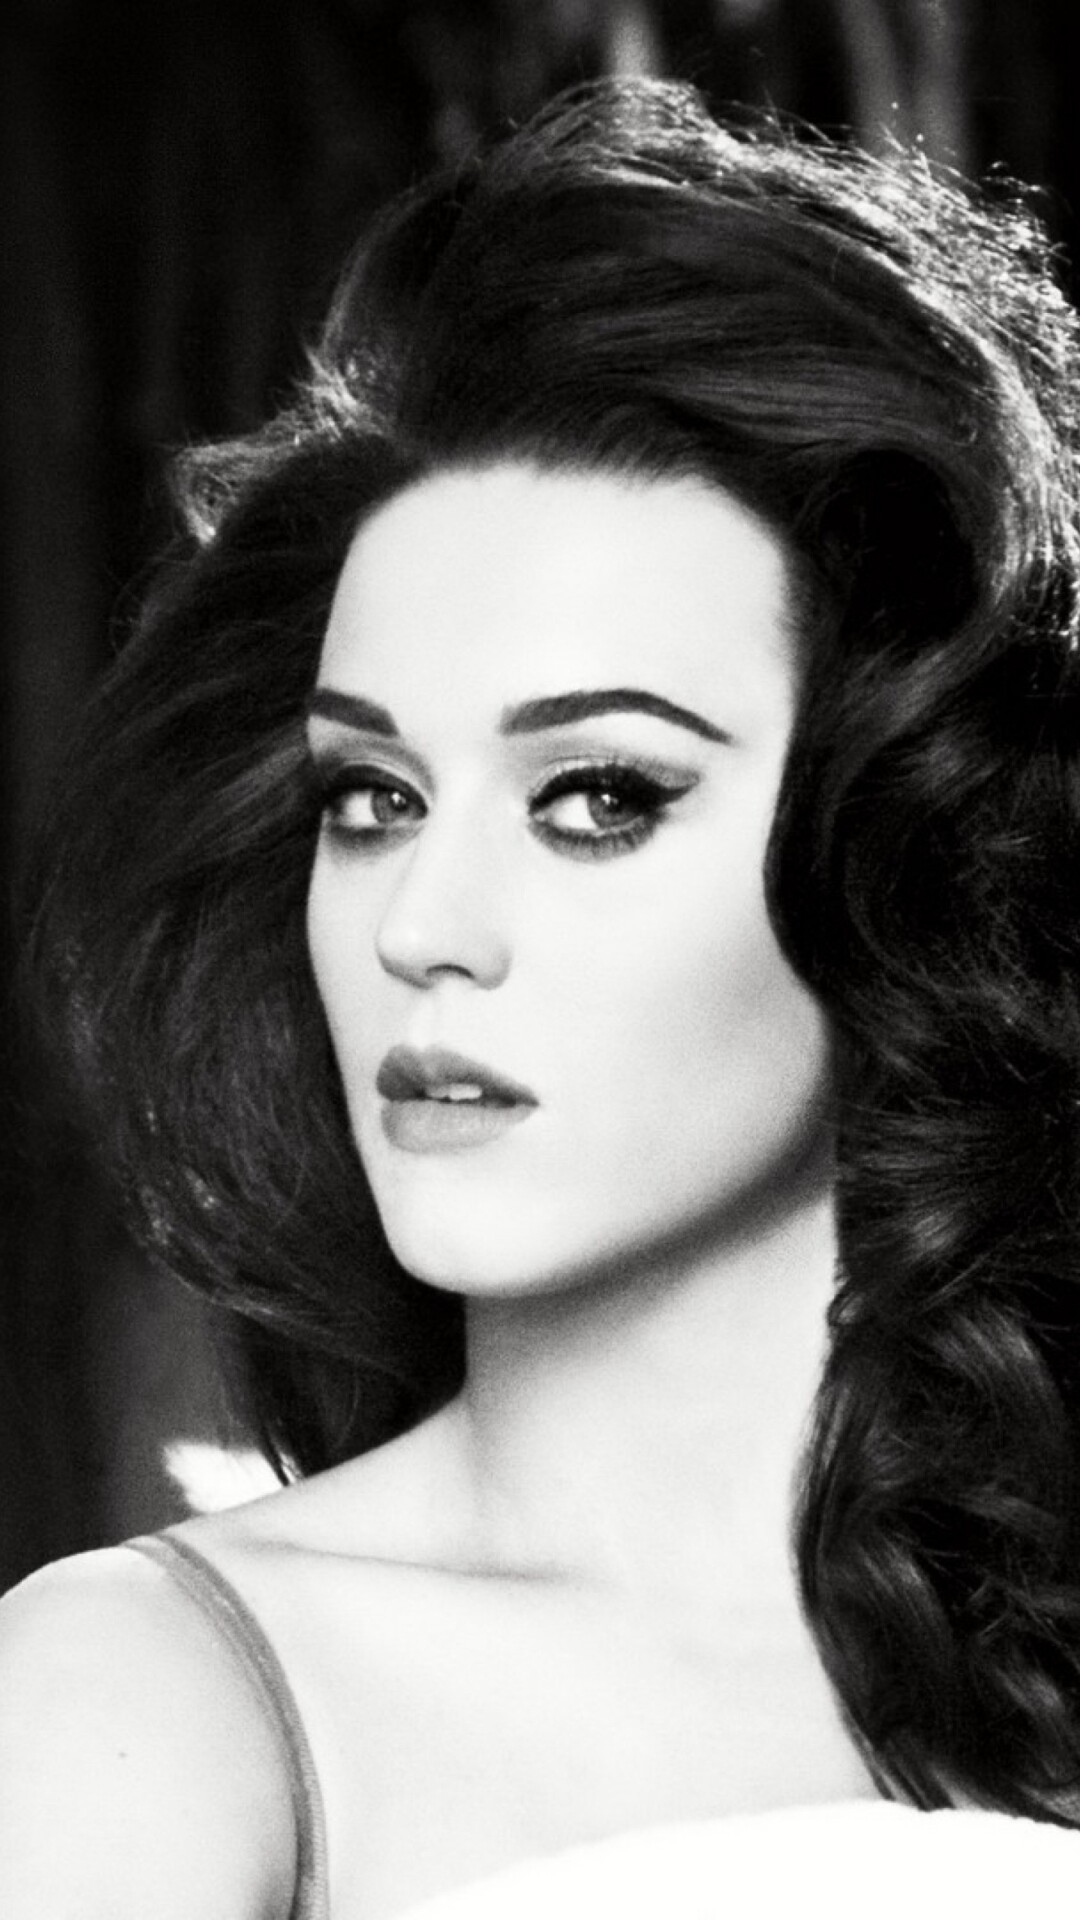 Katy Perry: Black and white, Released her first single with Capitol, "I Kissed a Girl", on April 28, 2008. 1080x1920 Full HD Background.